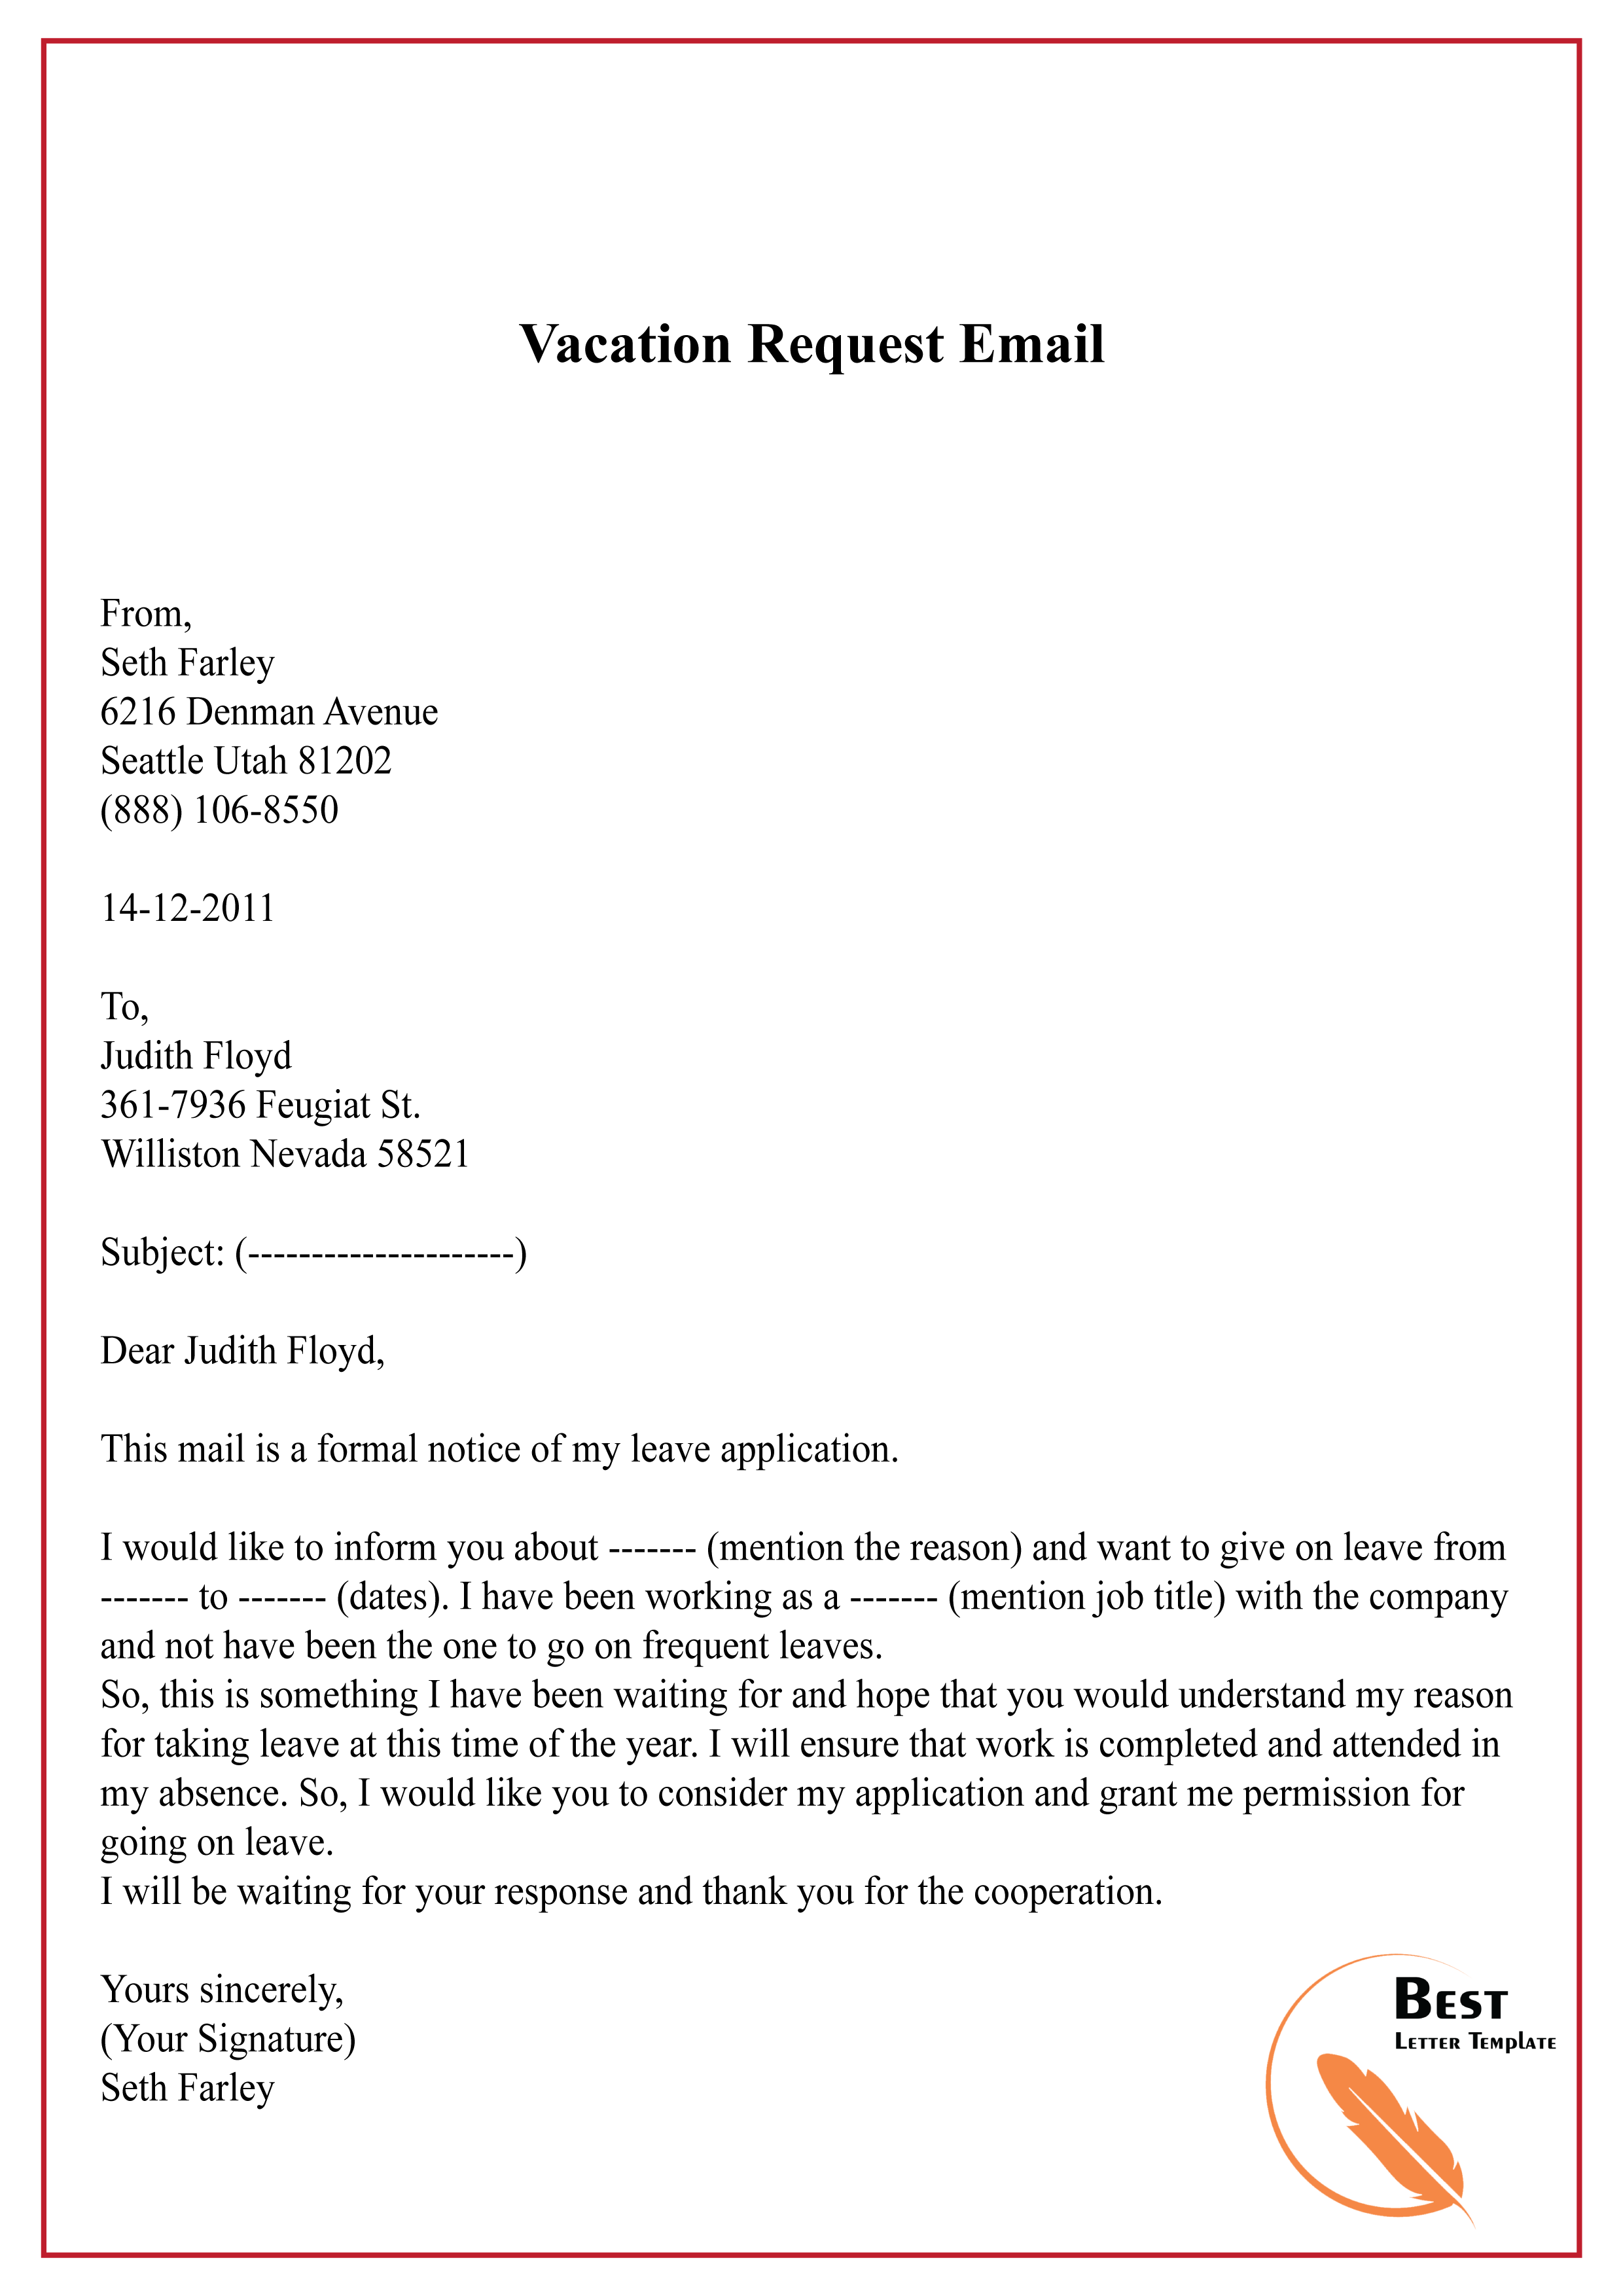 Vacation Request Email 01 Best Letter Template